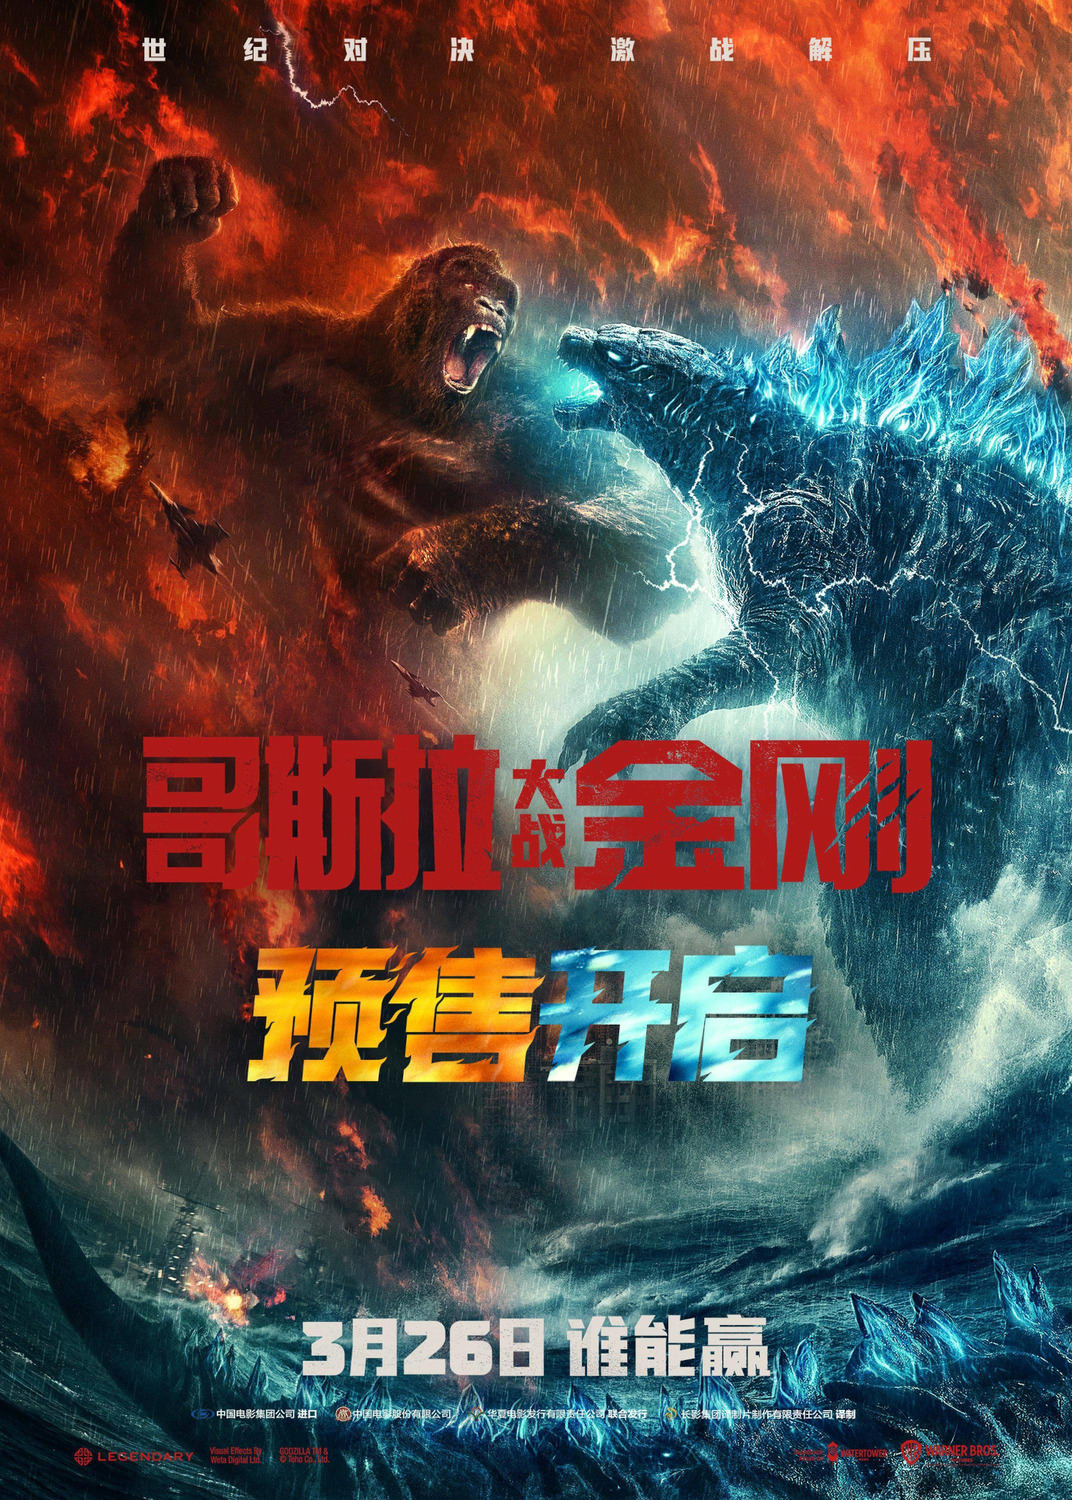 Extra Large Movie Poster Image for Godzilla vs. Kong (#17 of 20)